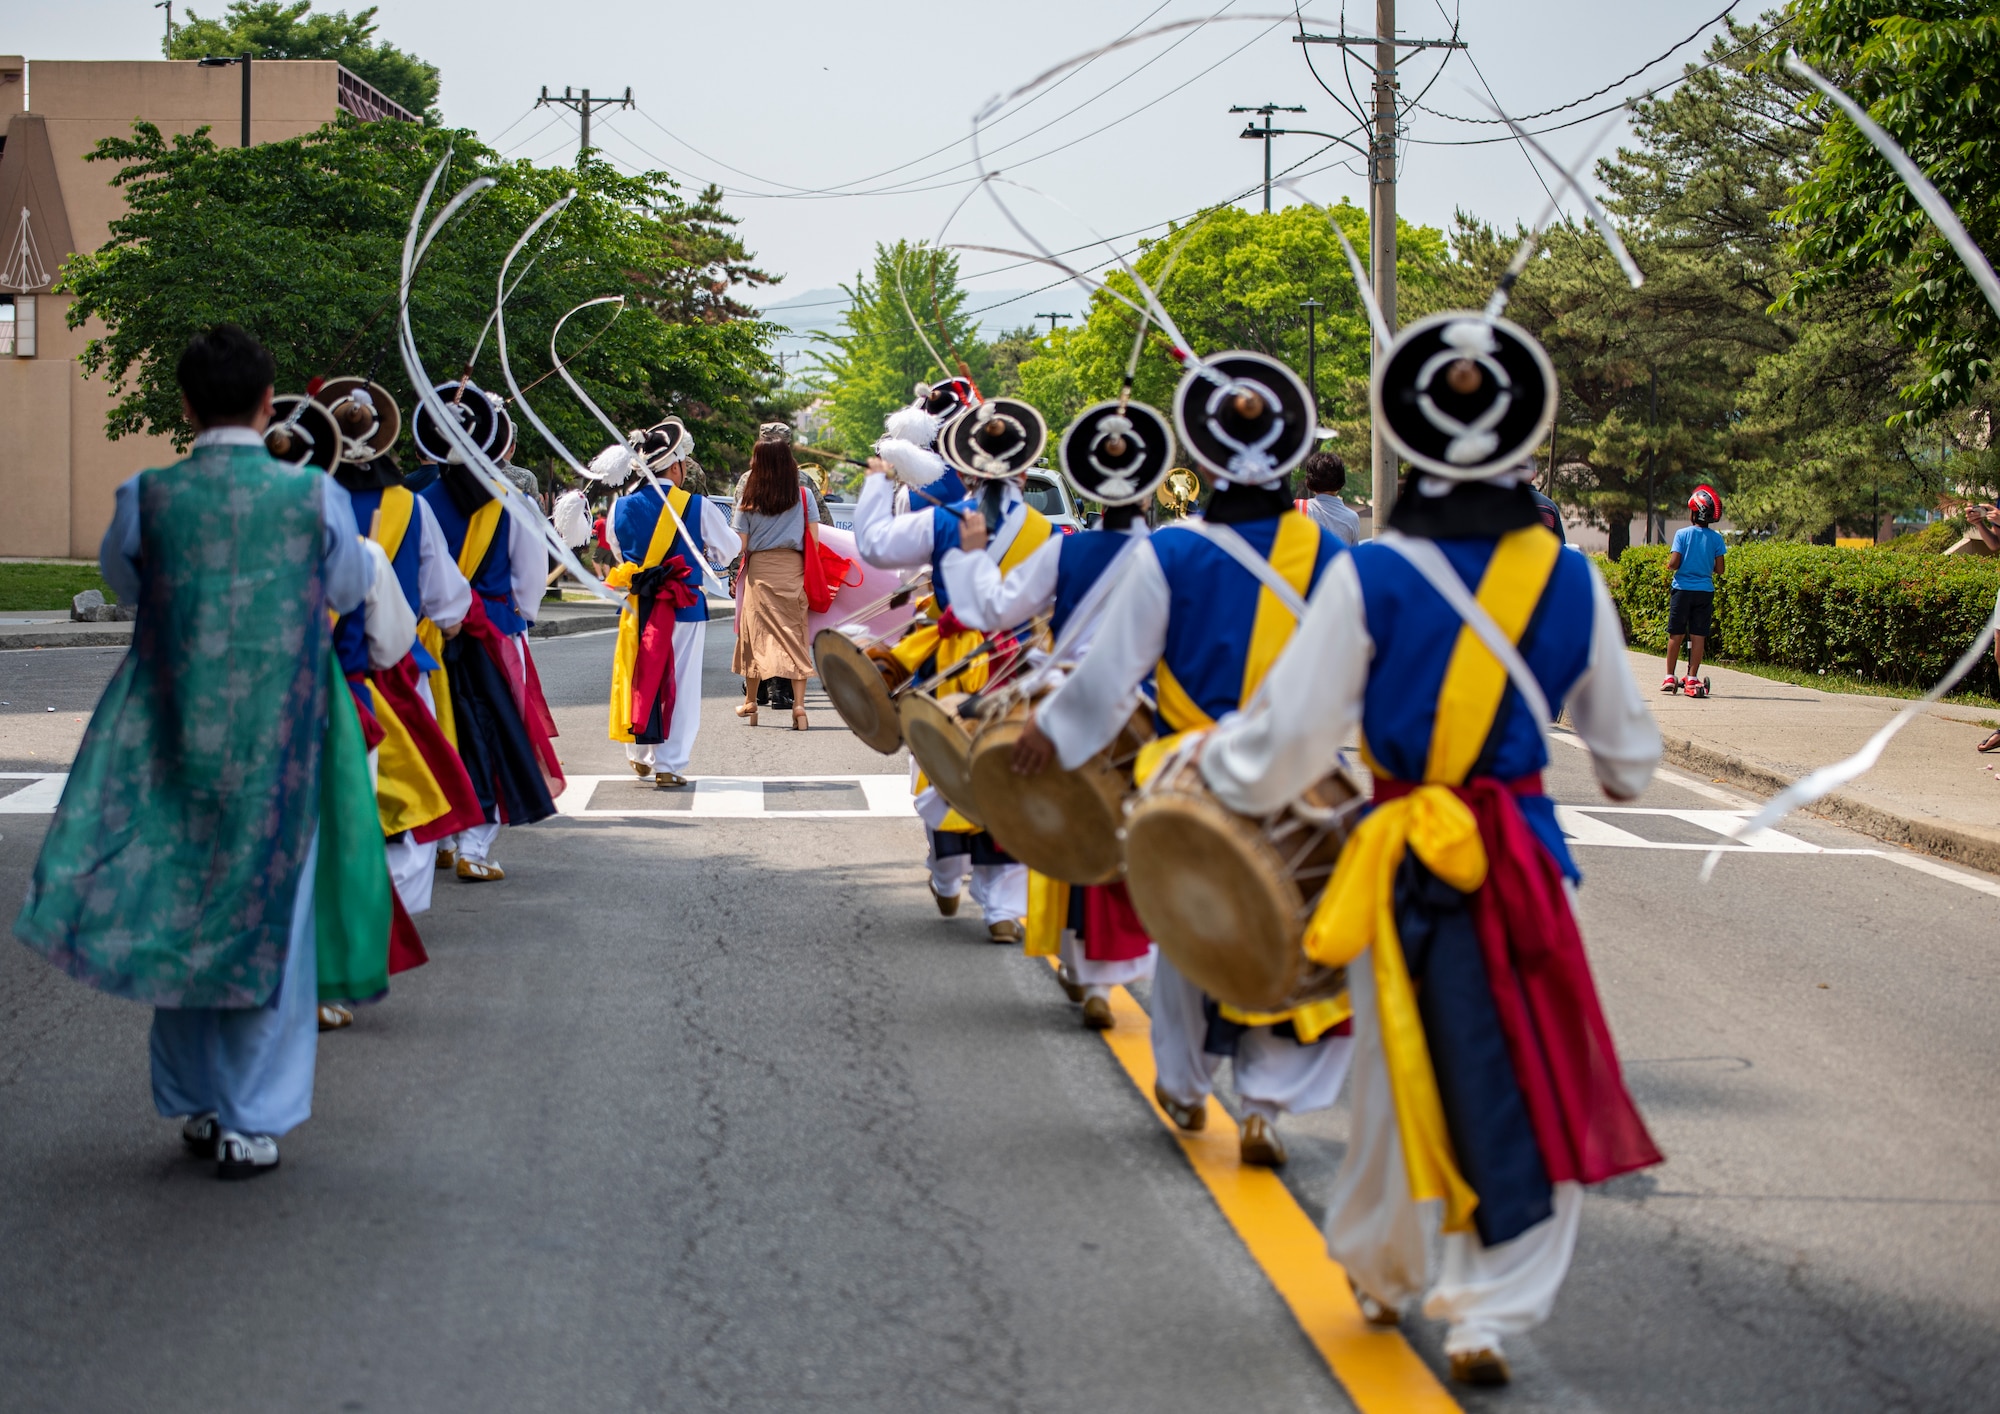 Pyeongtaek International Exchange Foundation (PIEF) members play instruments and perform during the Armed Forces Day Parade.